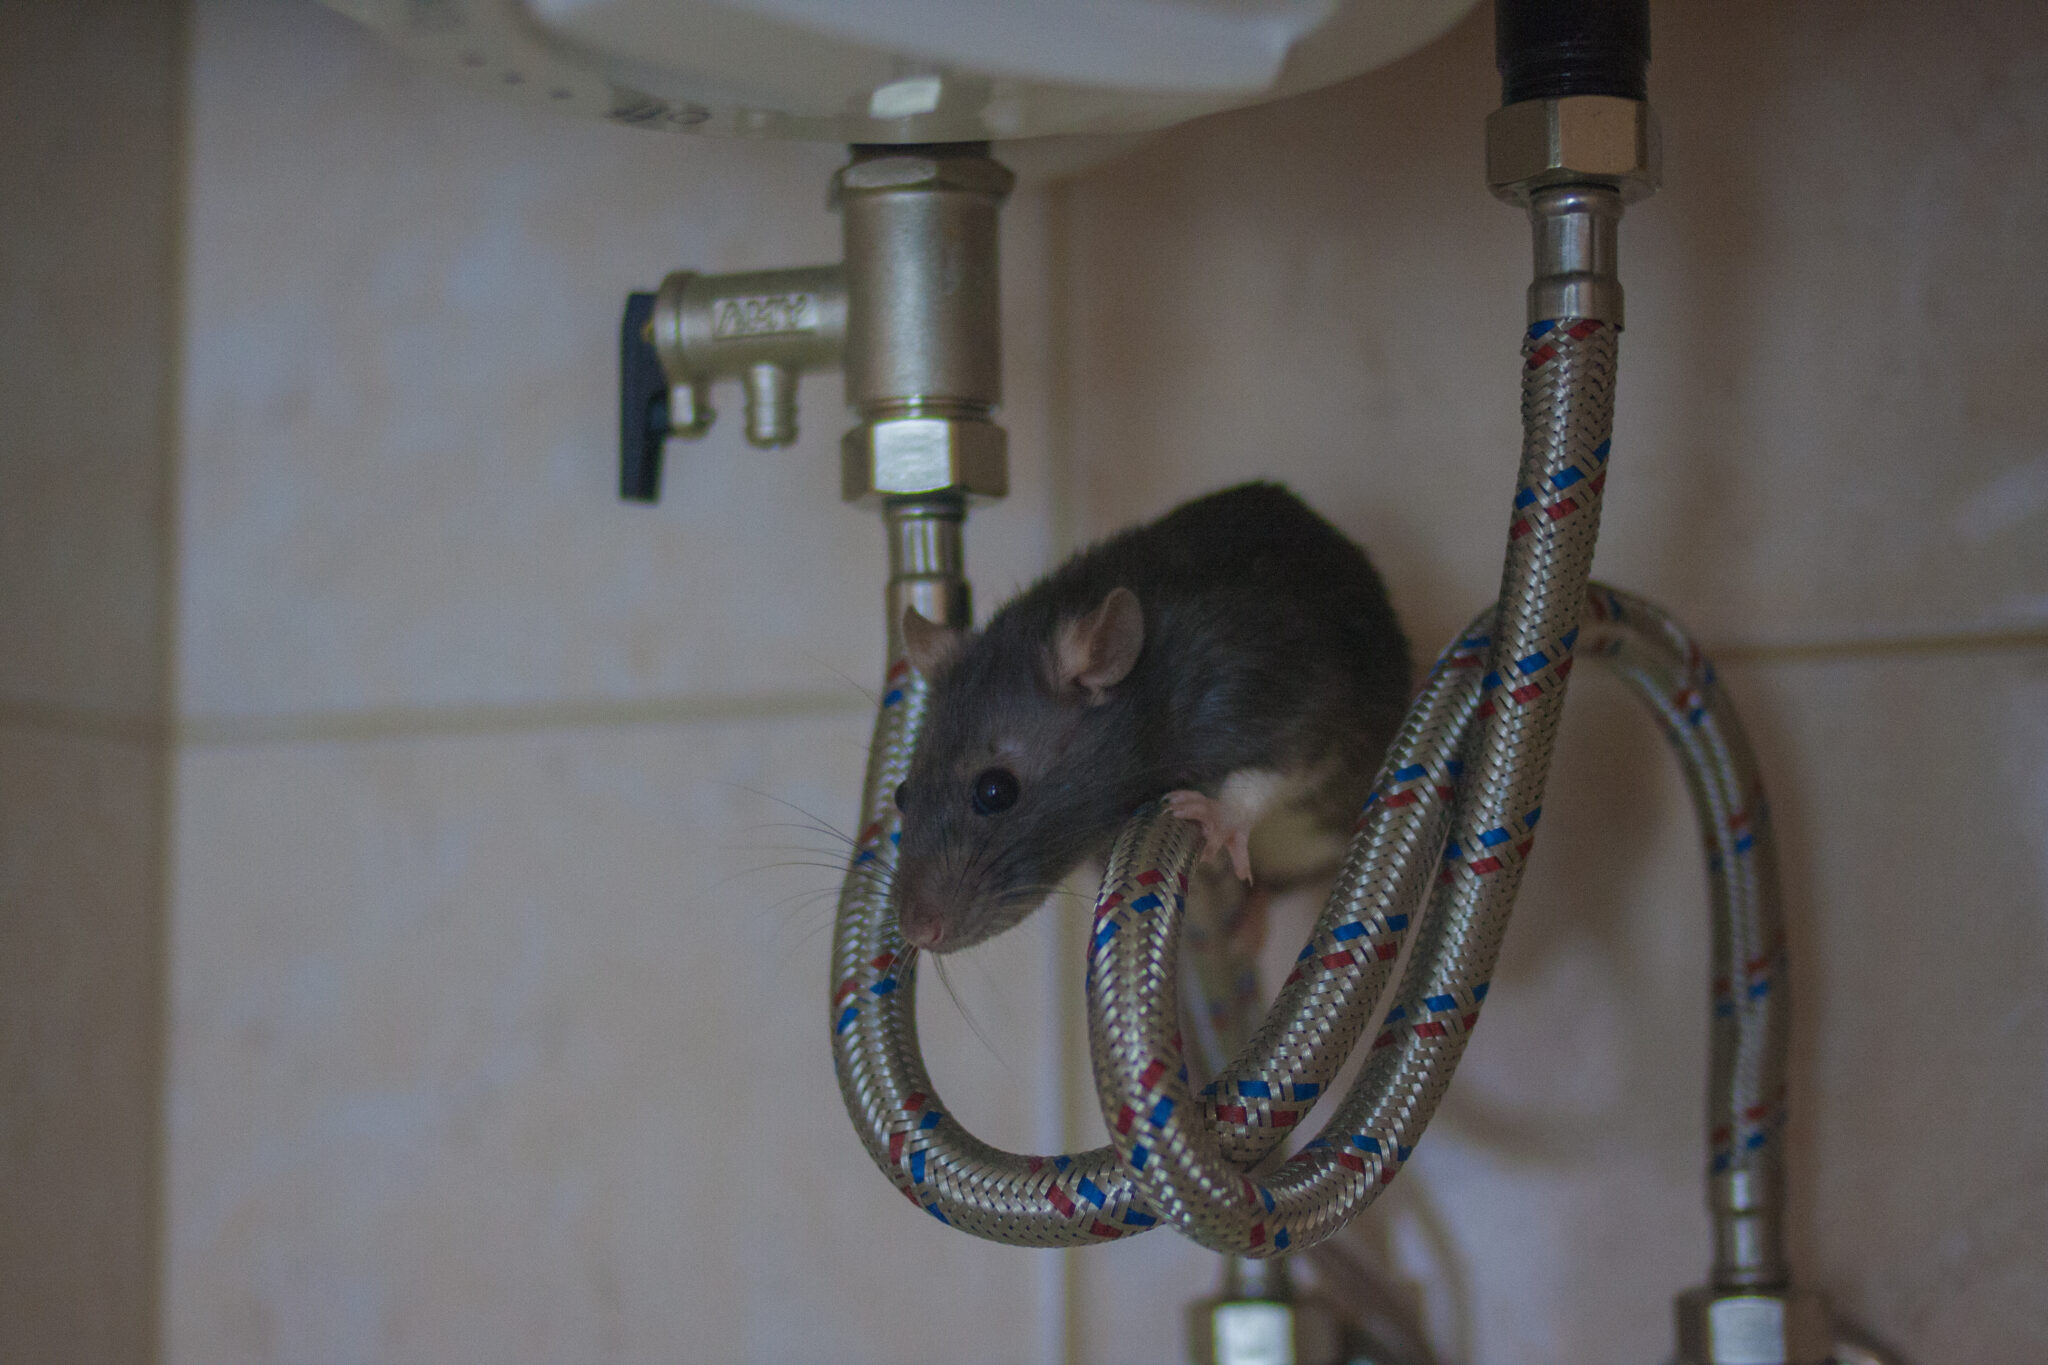 rodent on pipework underneath a sink in a Townsville home